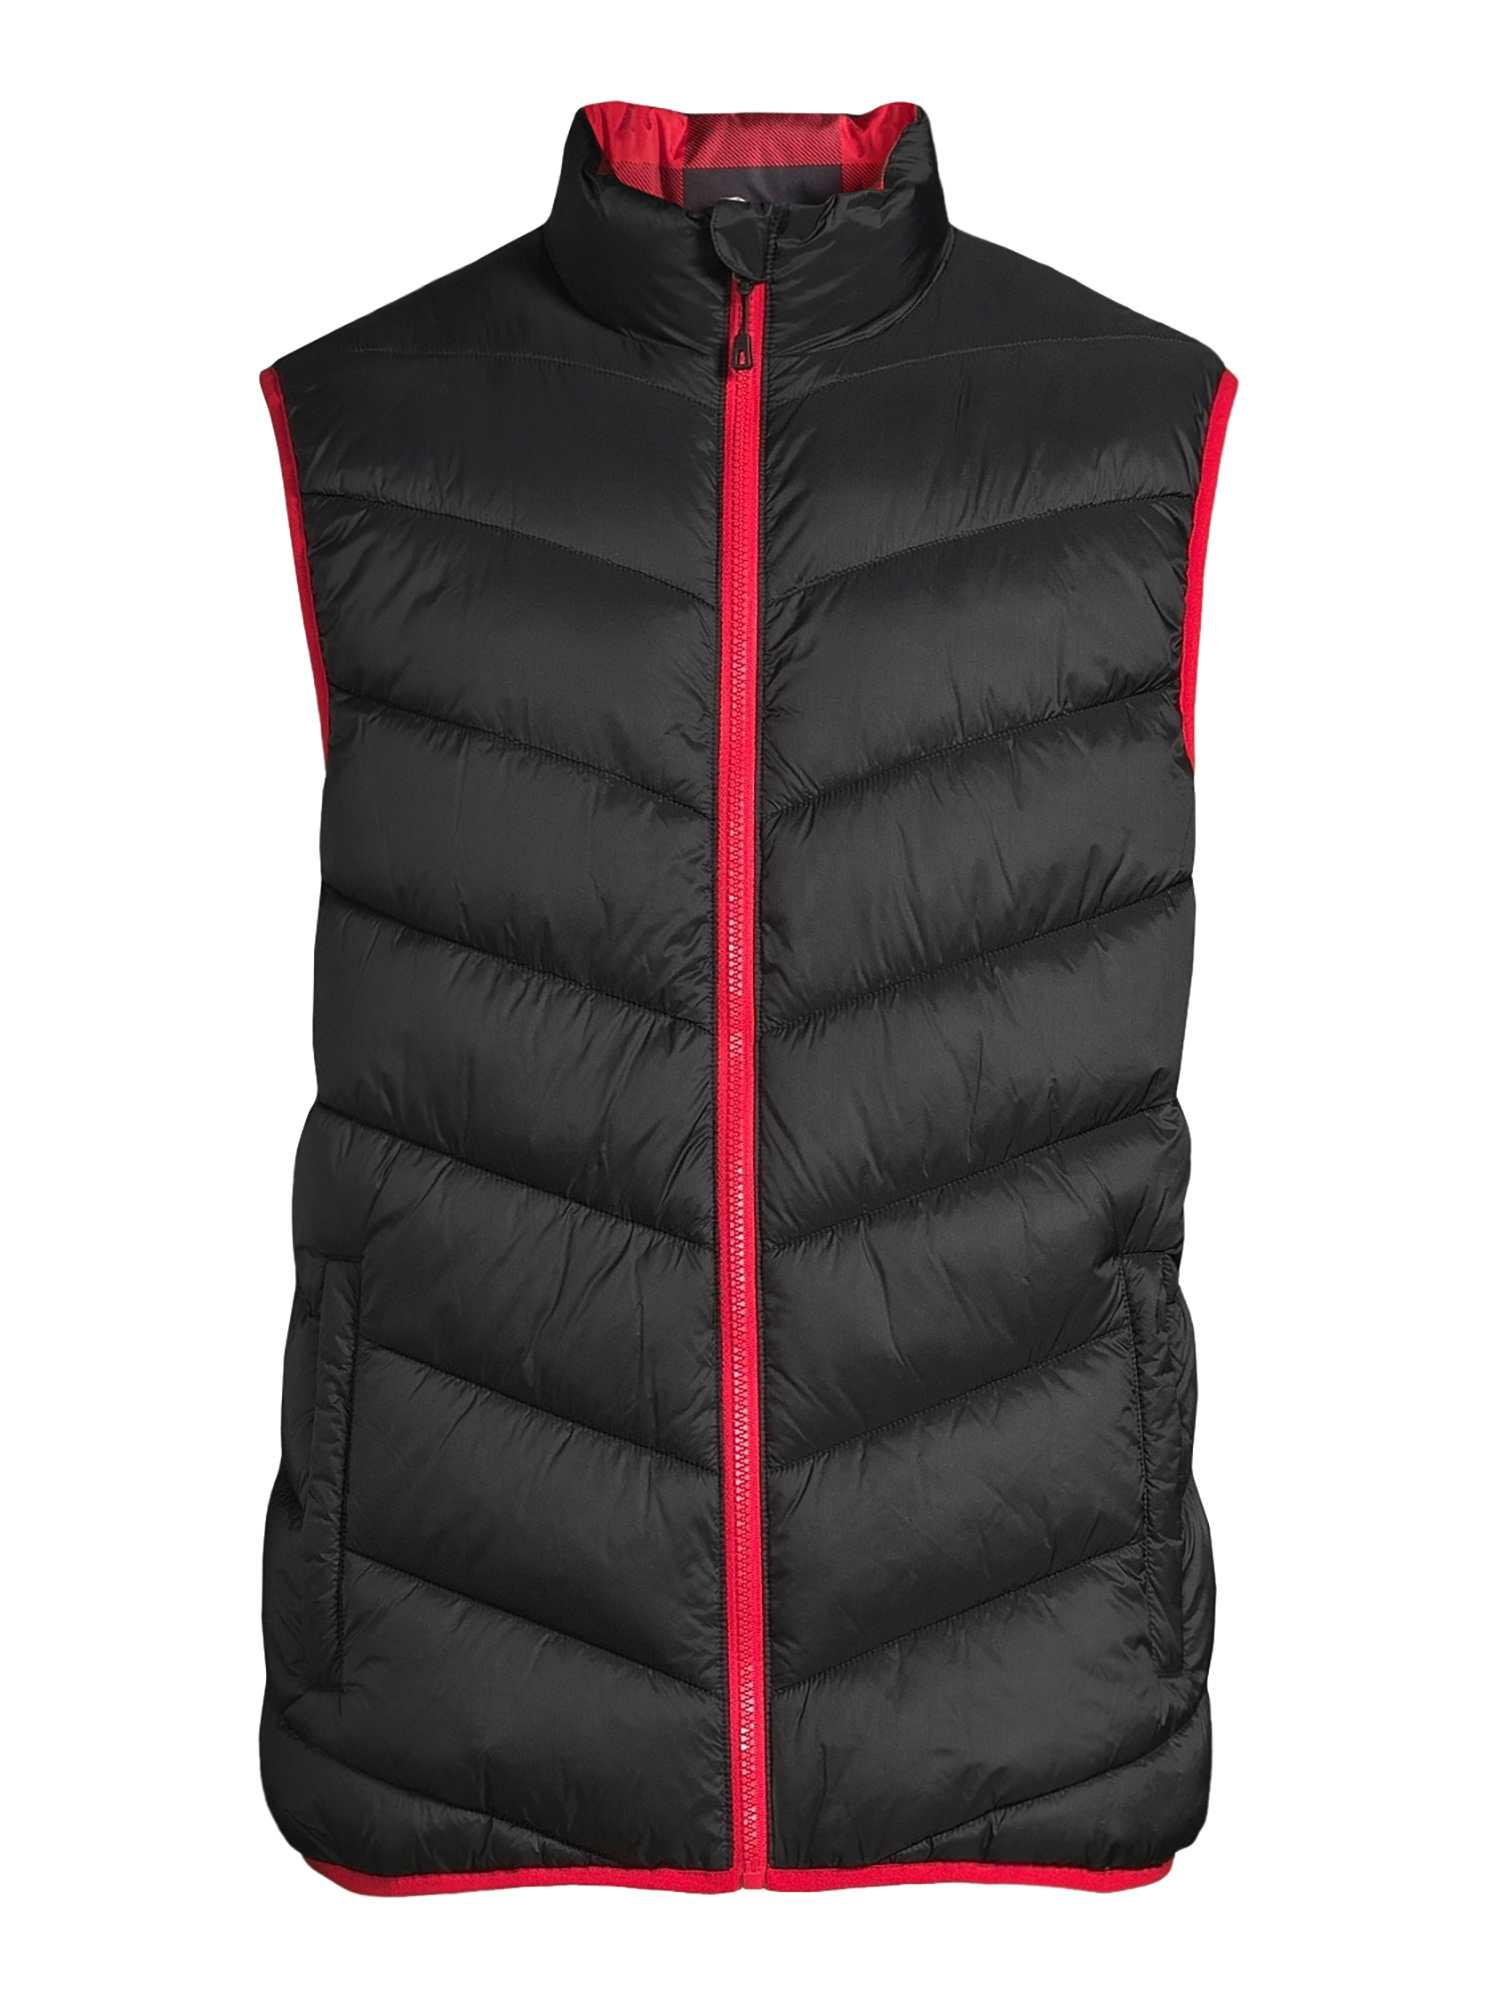 Swiss Tech Men's Reversible Puffer Vest, Up to Size 3XL - image 3 of 4